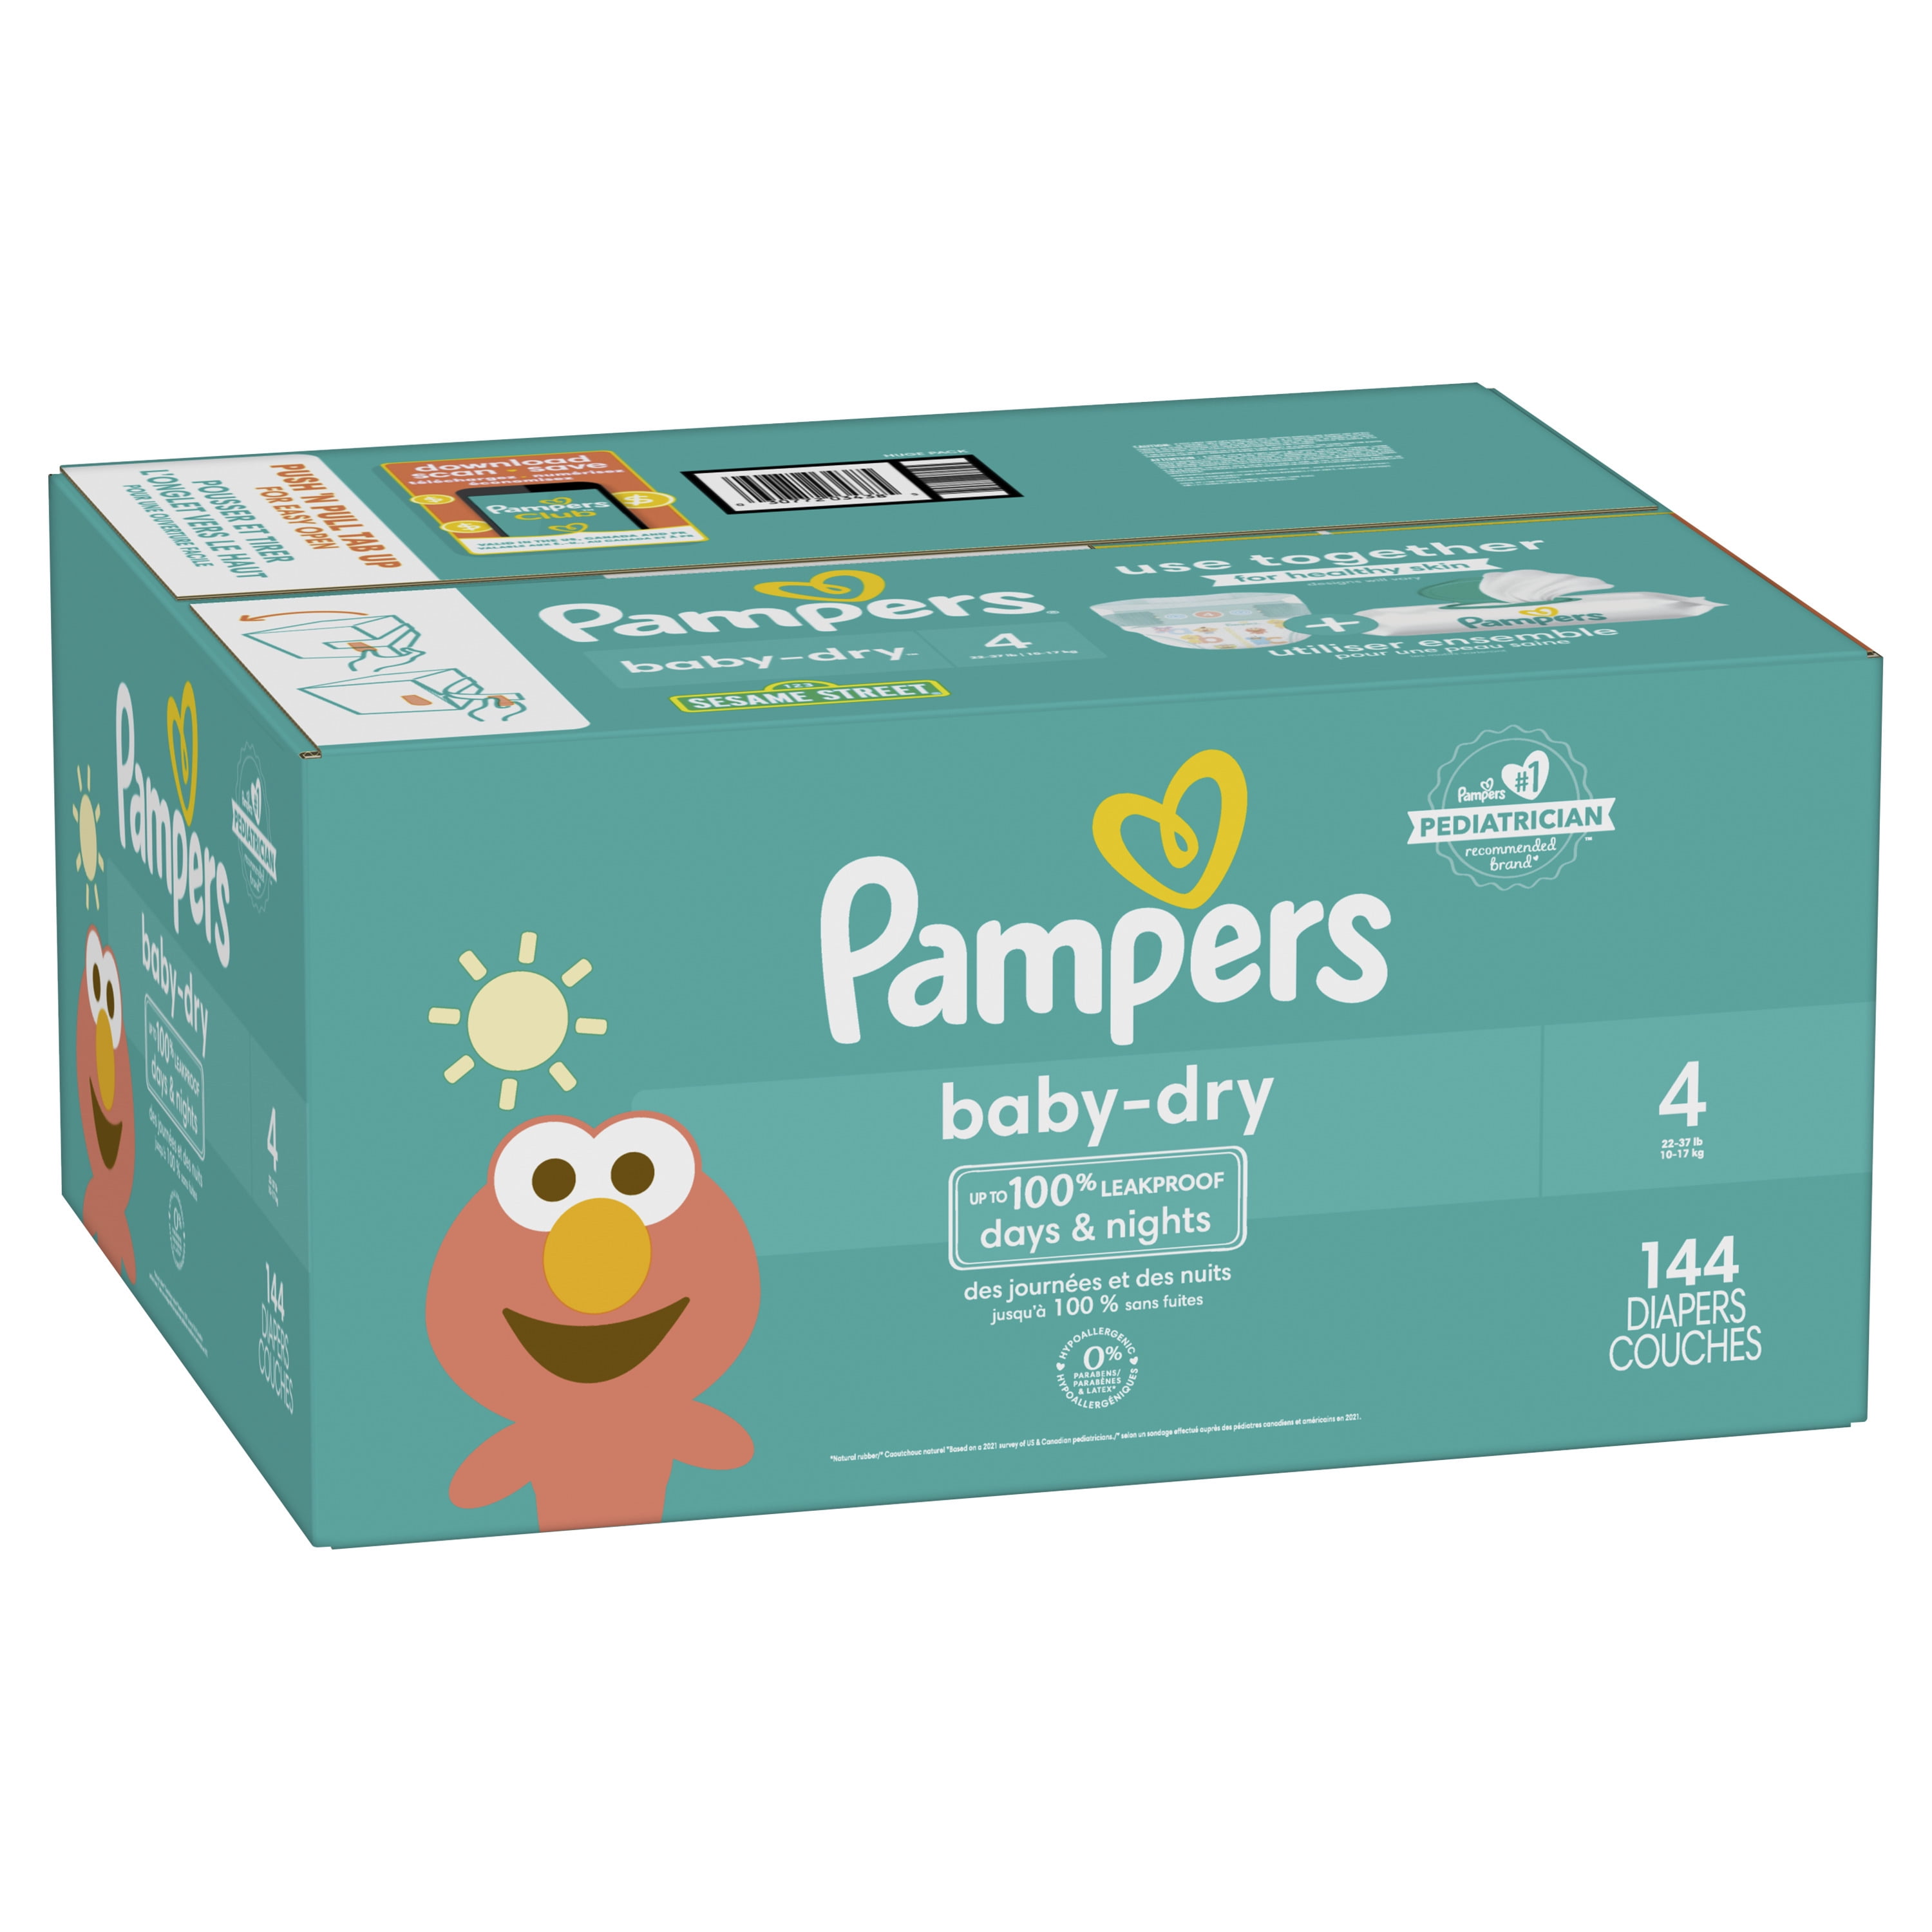 Lemon As well thesaurus Pampers Baby Dry Diapers Size 4, 144 Count (Select for More Options) -  Walmart.com